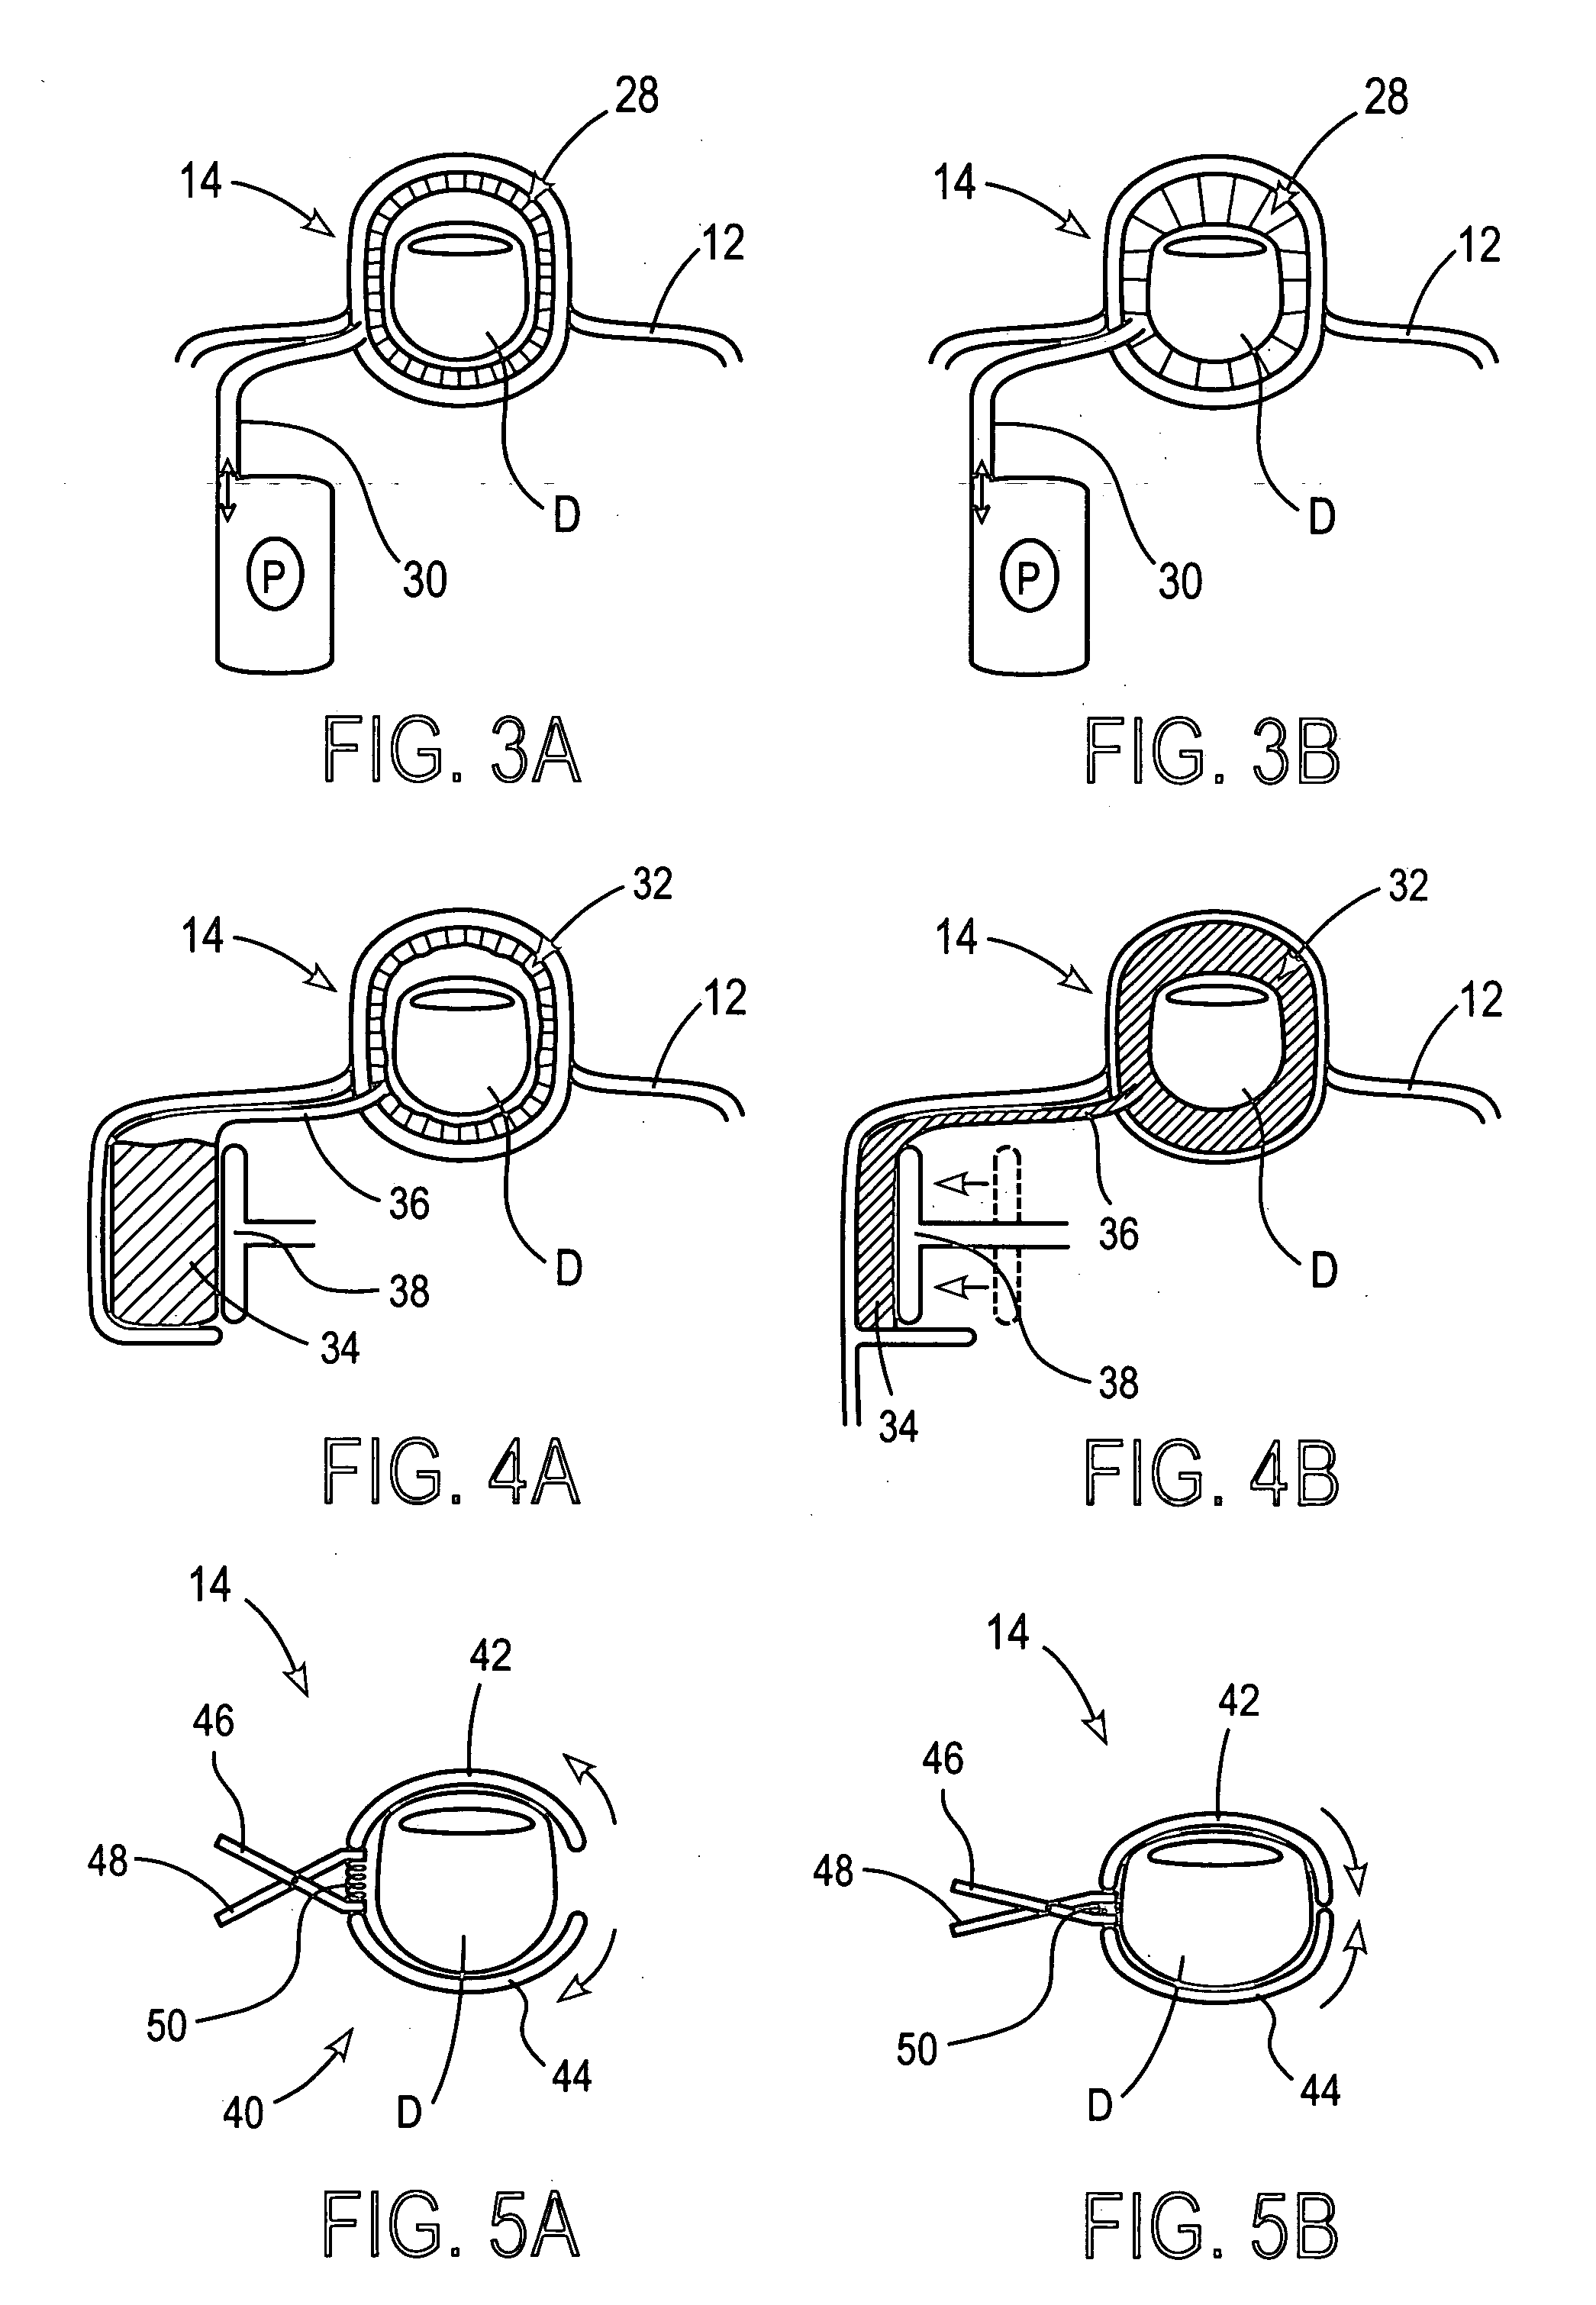 Body fluid monitoring and sampling devices and methods